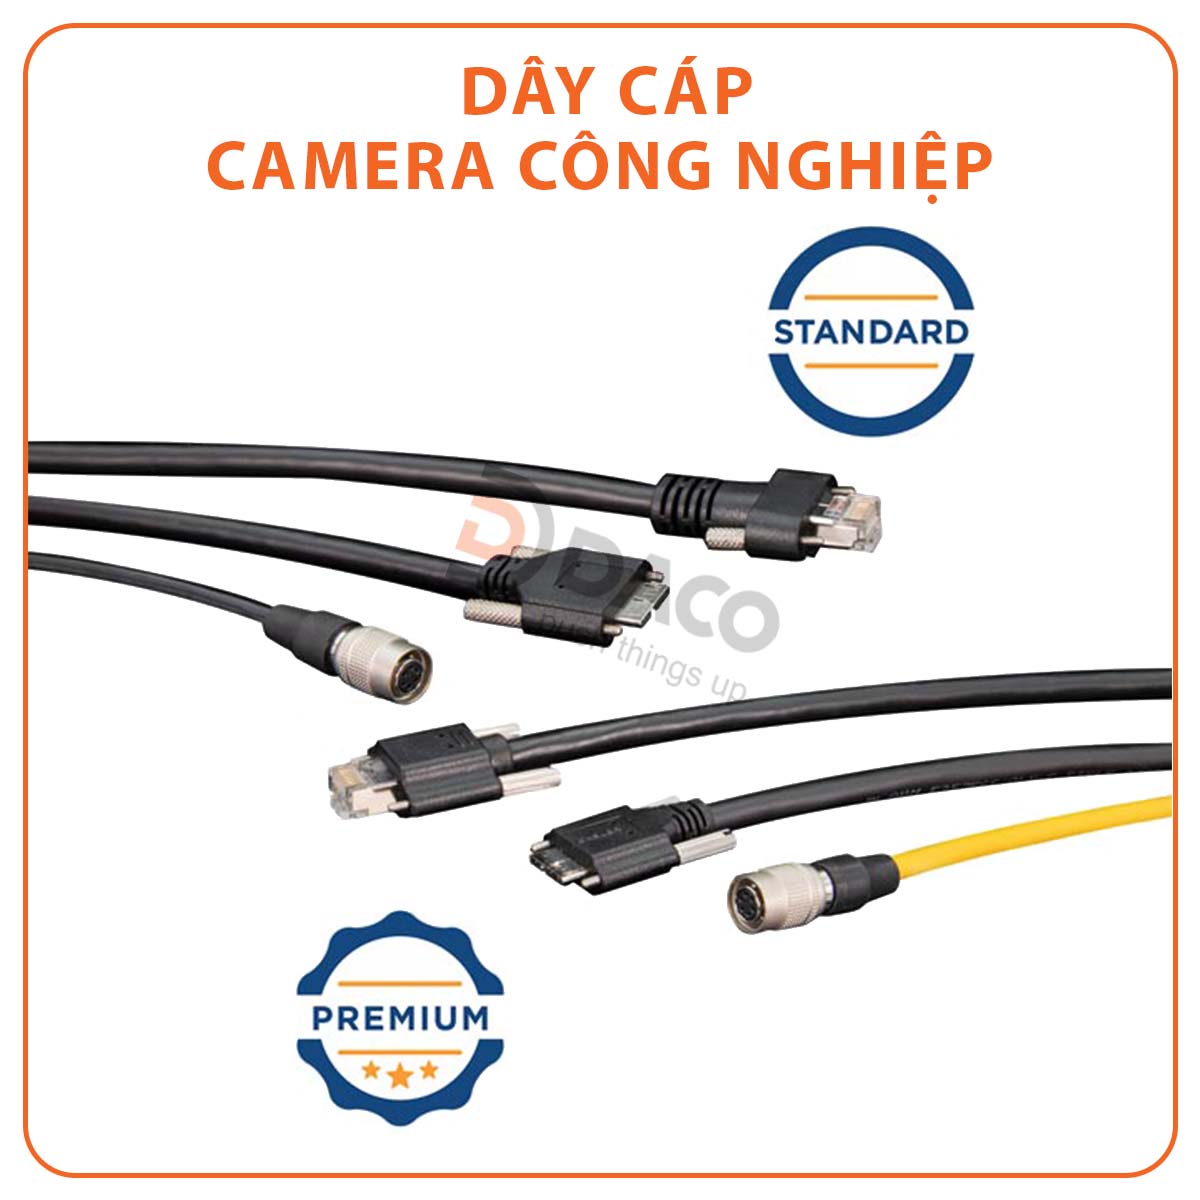 a2A5328-4gmBAS Camera Công Nghiệp Basler Ace 2 Basic, 24.4 MP, IMX540, Mono, Gig Day_cable_cap_camera_cong_nghiep_basler